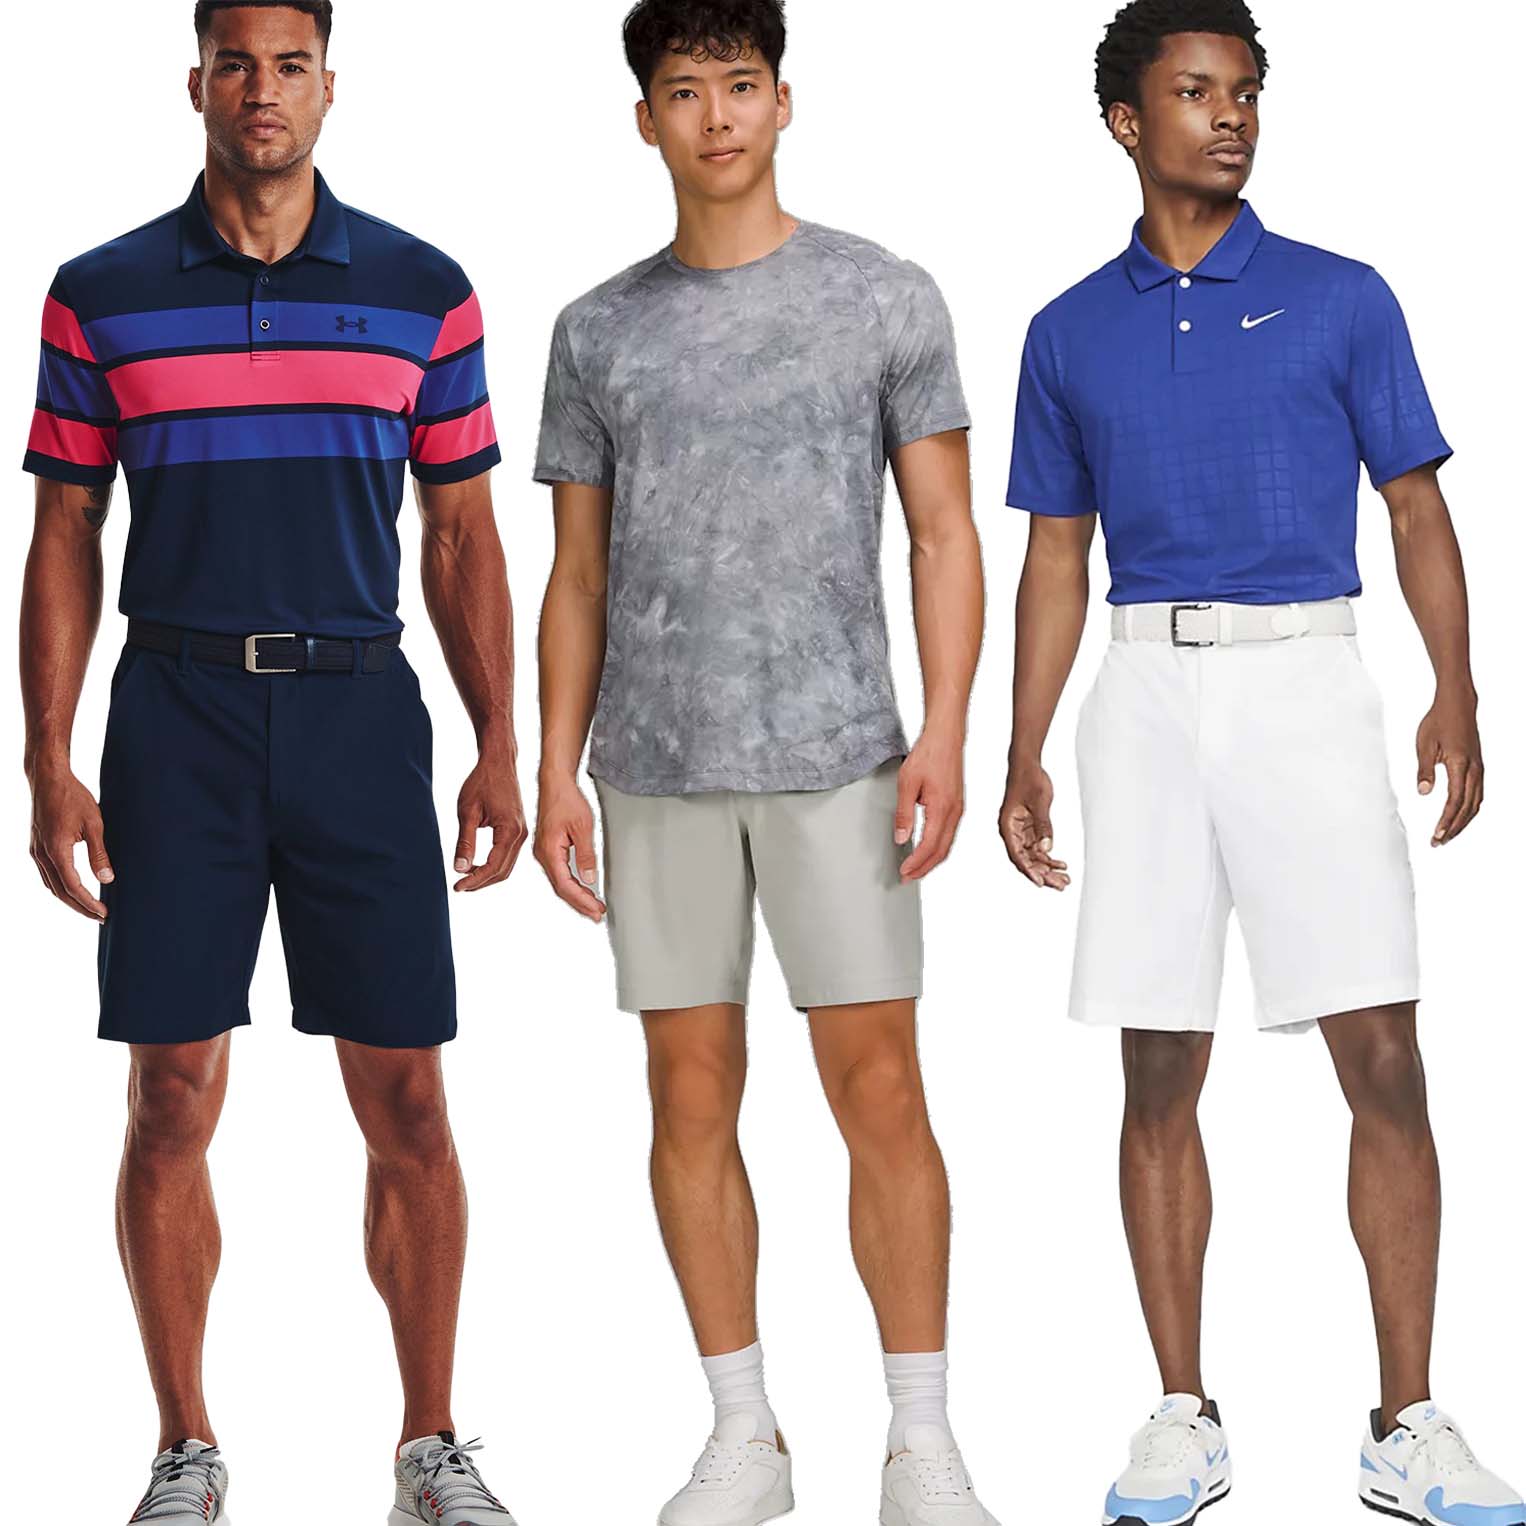 10 Beach Outfits For Men That Will Make Waves This Summer